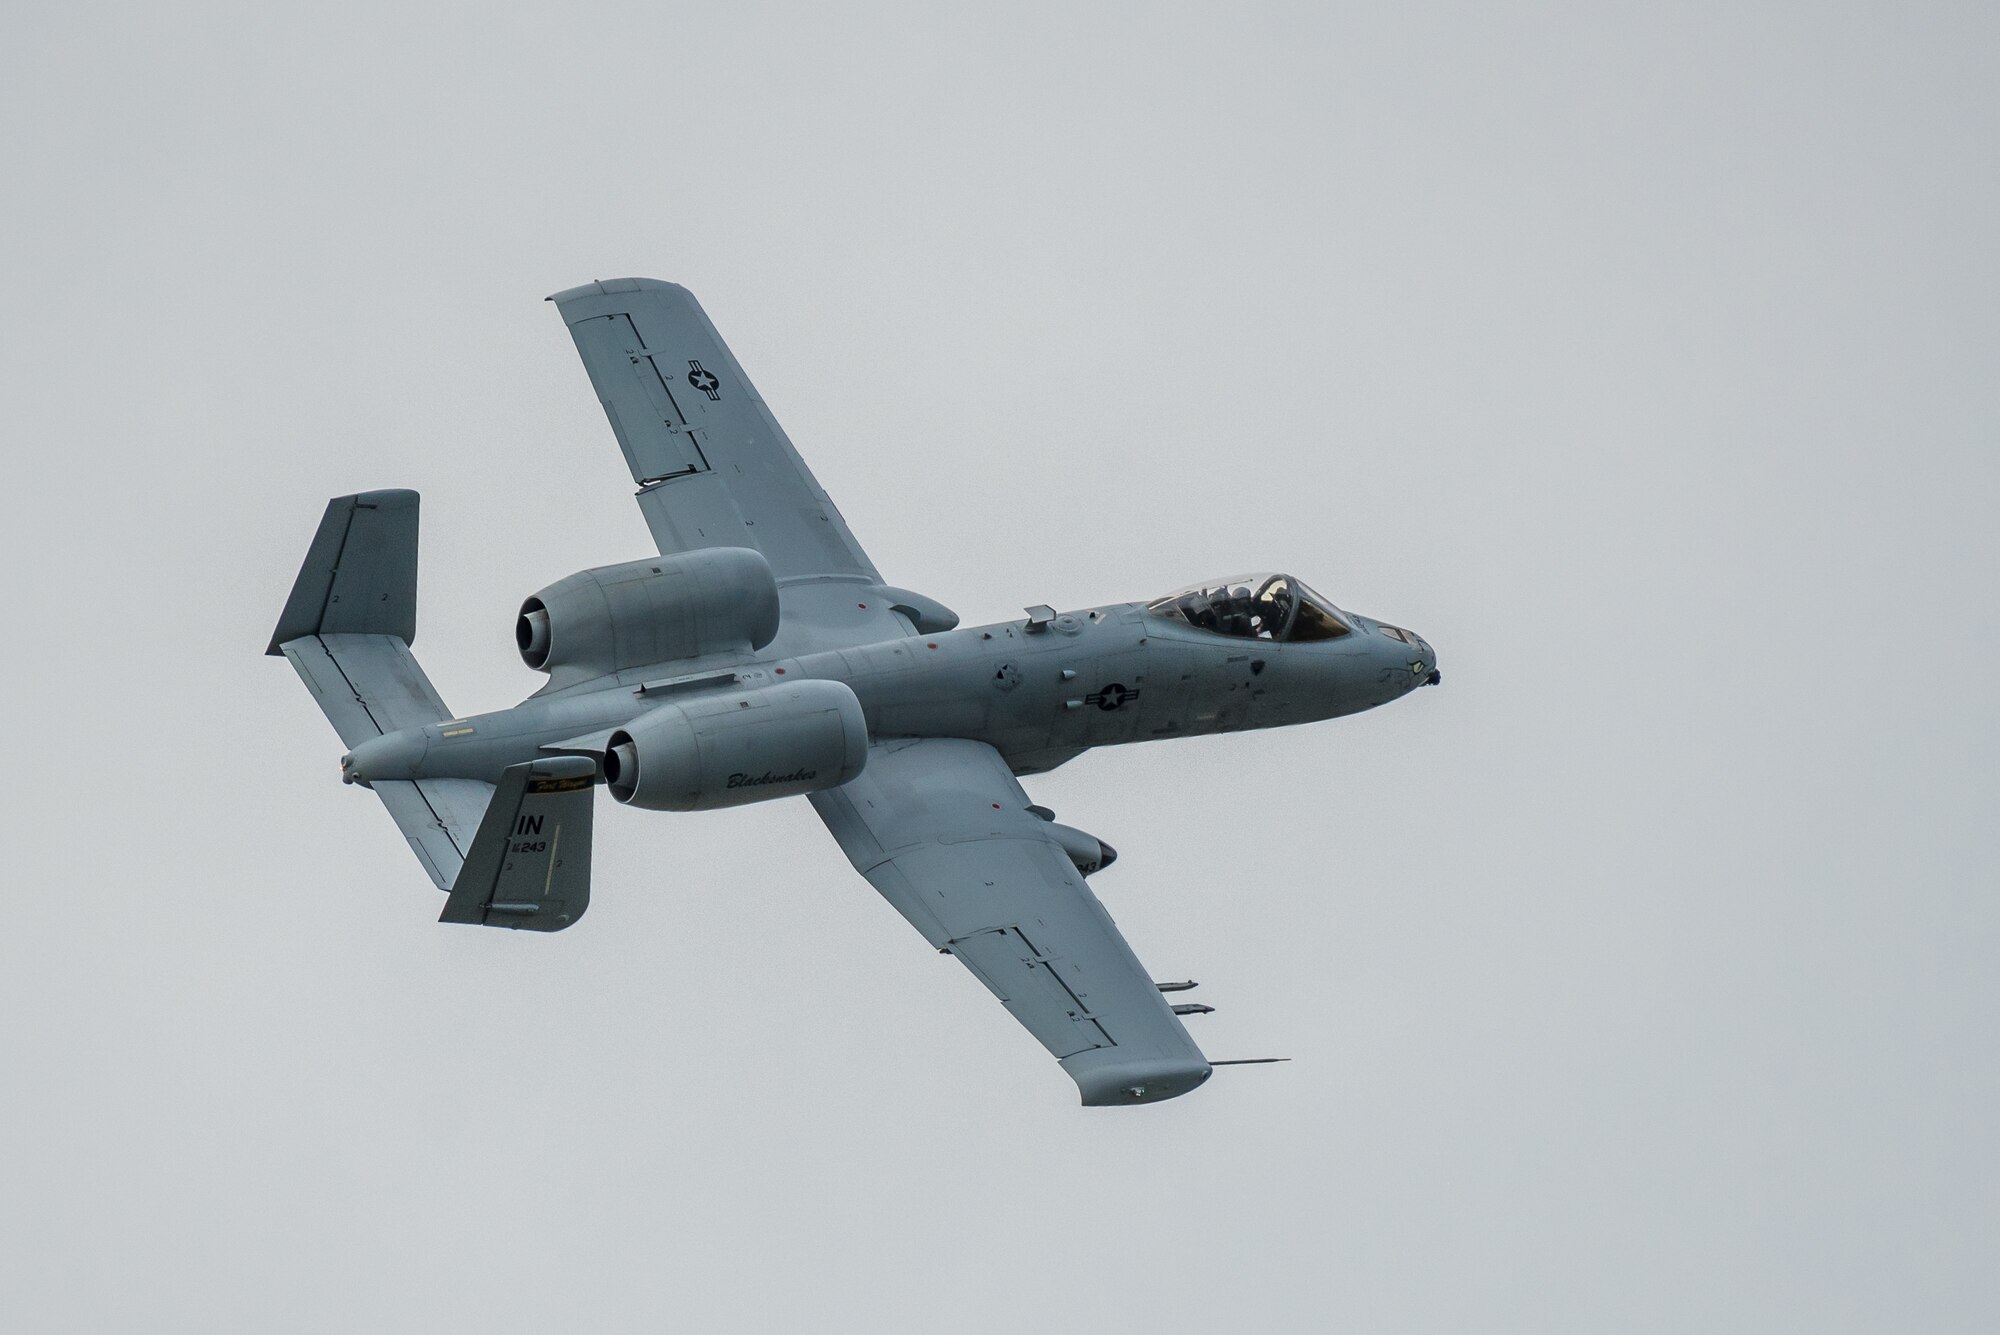 An A-10 Thunderbolt II aircraft from the Indiana Air National Guard’s 163rd Fighter Squadron performs an aerial demonstration over the Ohio River April 13, 2019, as part of the Thunder Over Louisville airshow in Louisville, Ky. The Kentucky Air National Guard once again served as the base of operations for military aircraft participating in the annual event, which has grown to become one of the largest single-day air shows in North America. (U.S. Air National Guard photo by Dale Greer)